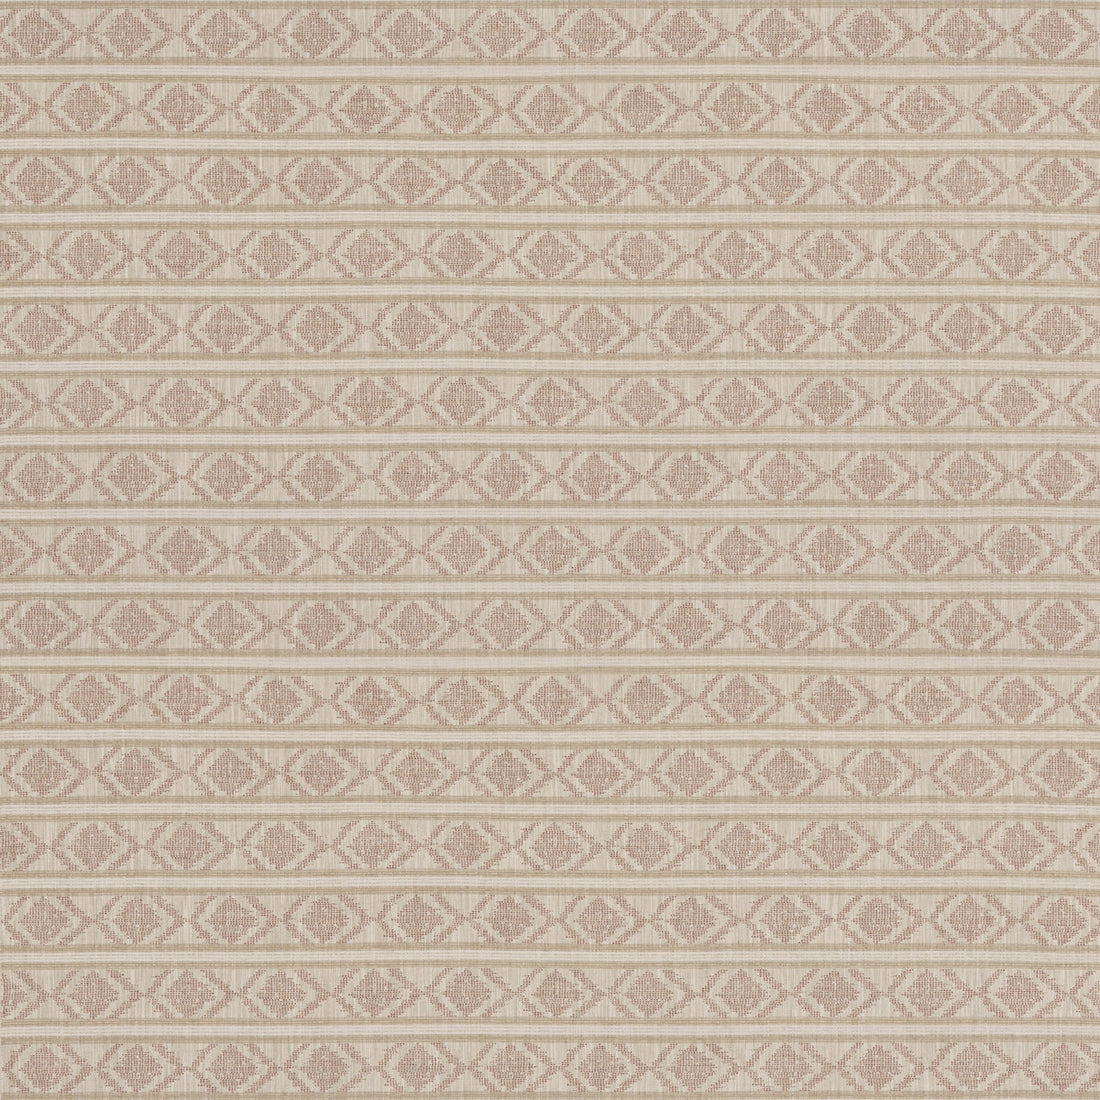 Burford Stripe fabric in coral color - pattern BF11034.5.0 - by G P &amp; J Baker in the Burford Weaves collection